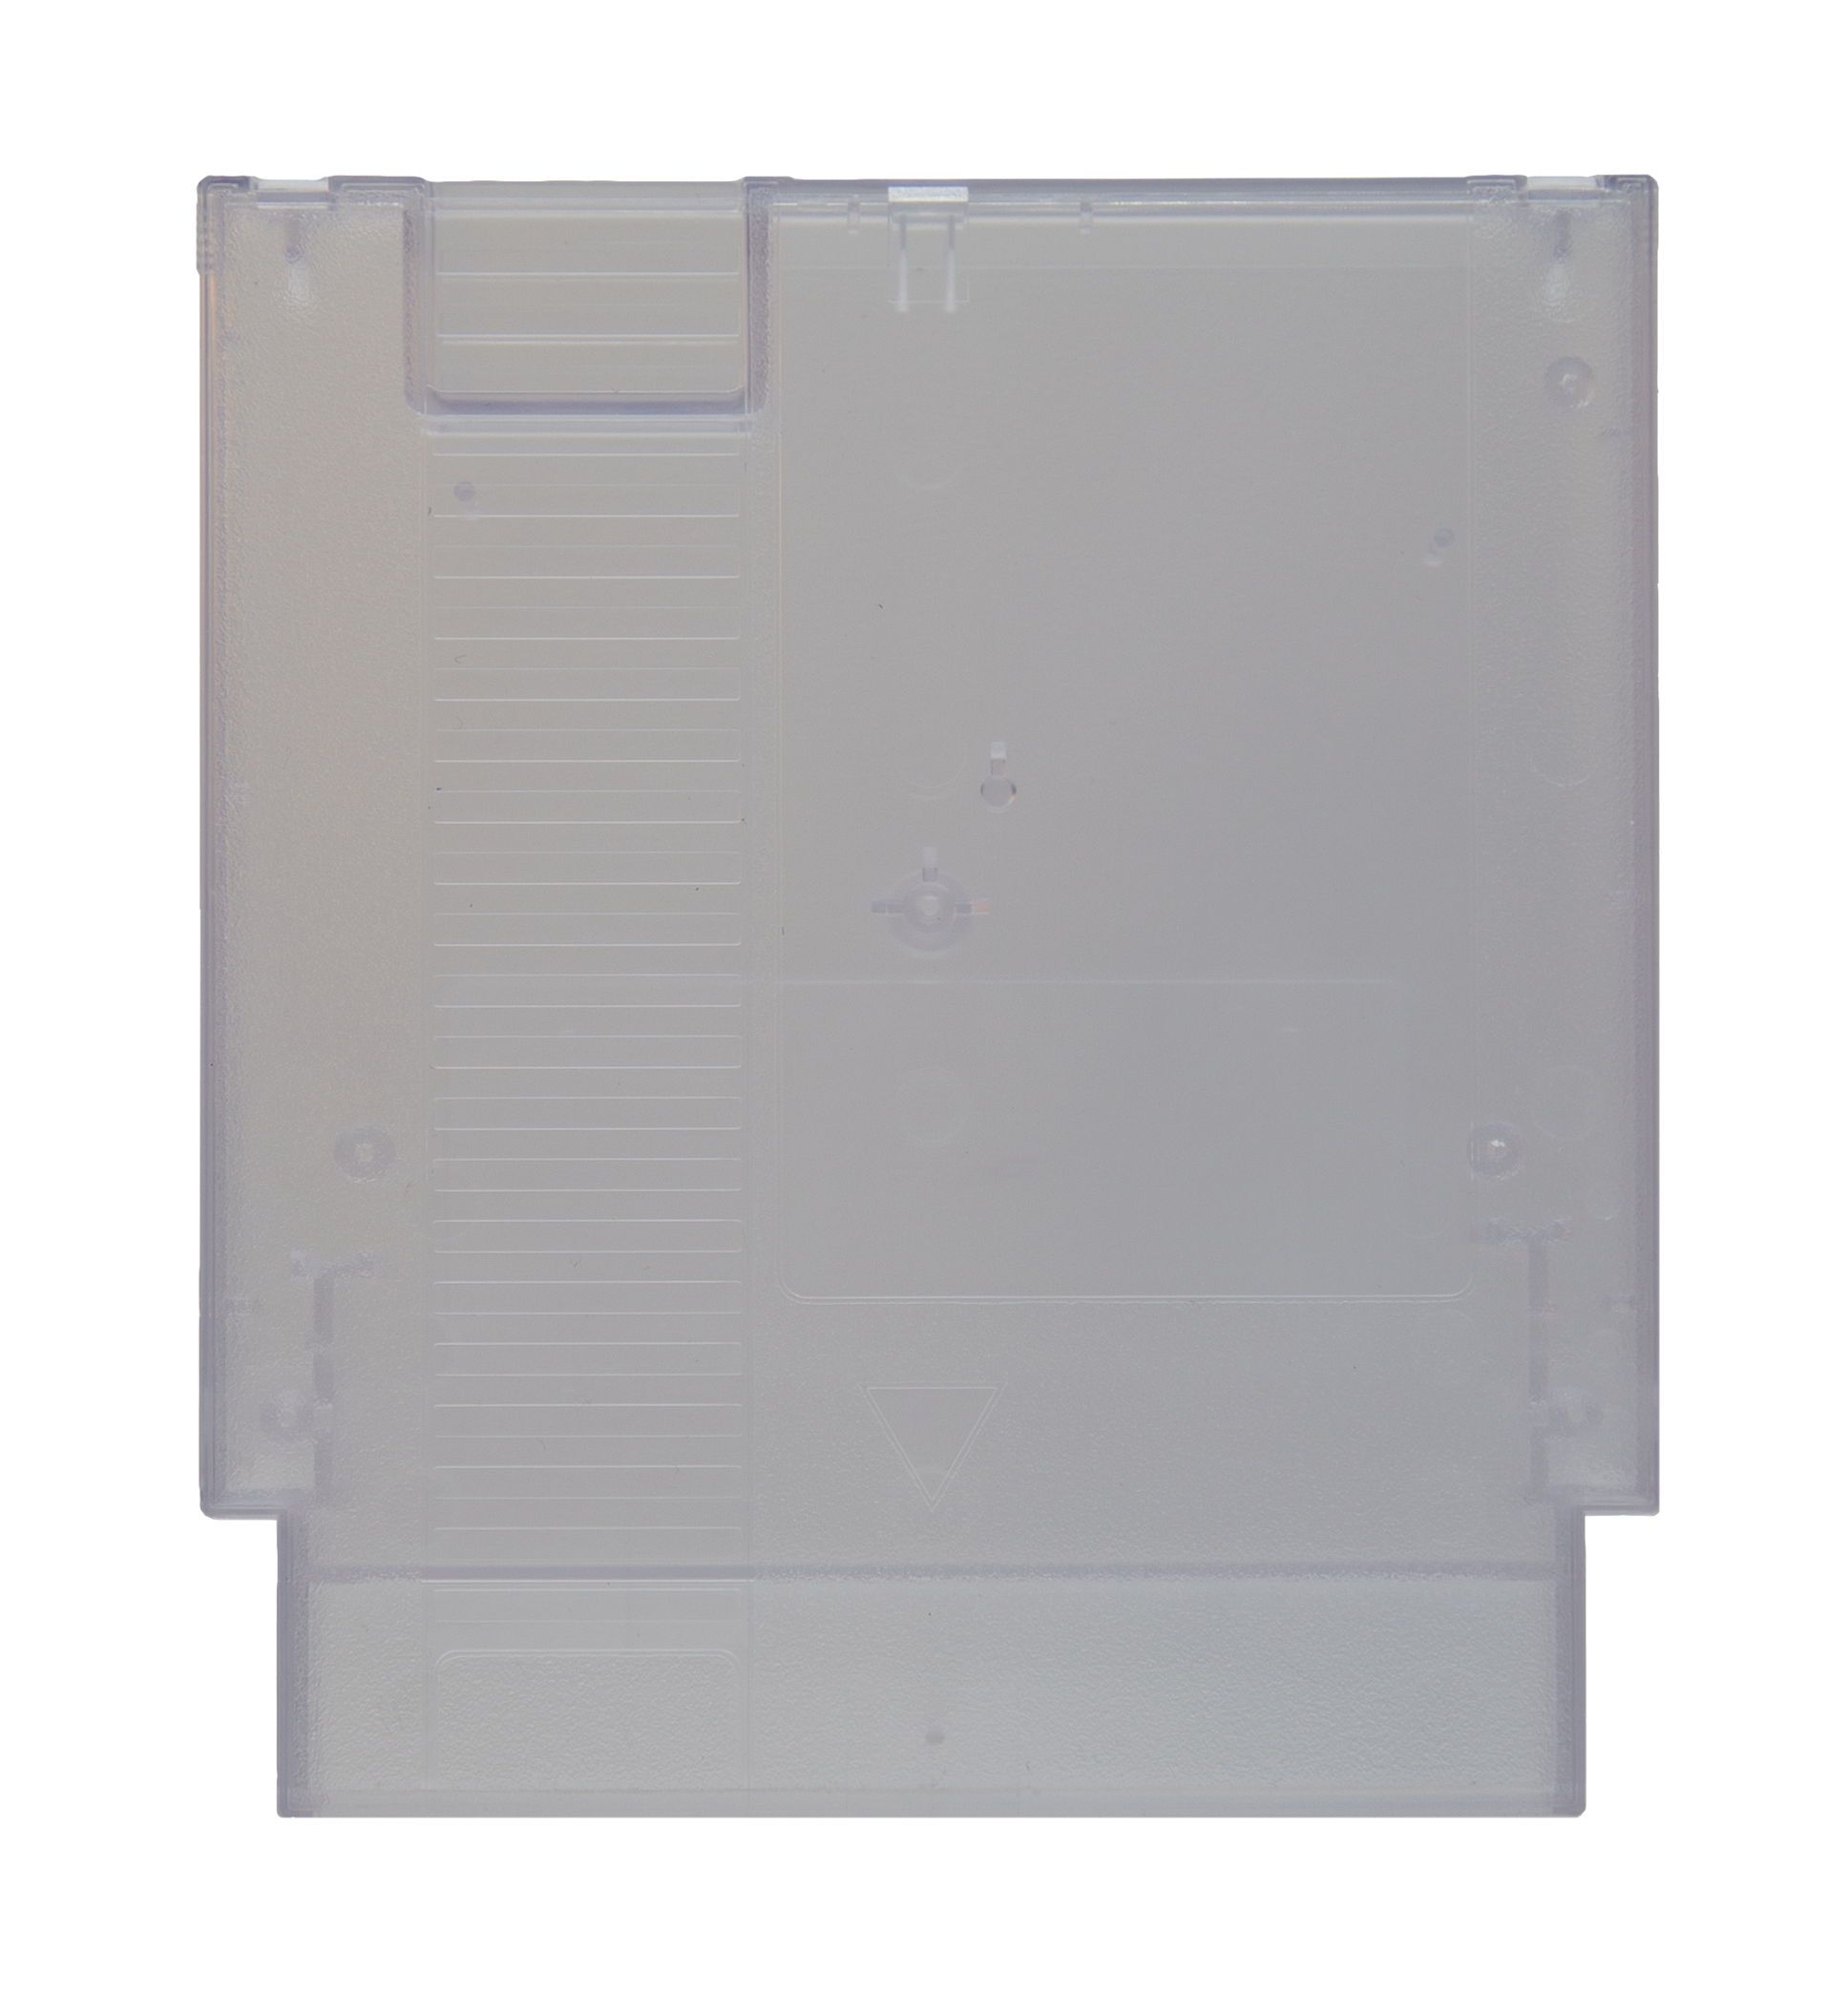 Clear NES (Nintendo Entertainment System) Replacement Cartridge Shell